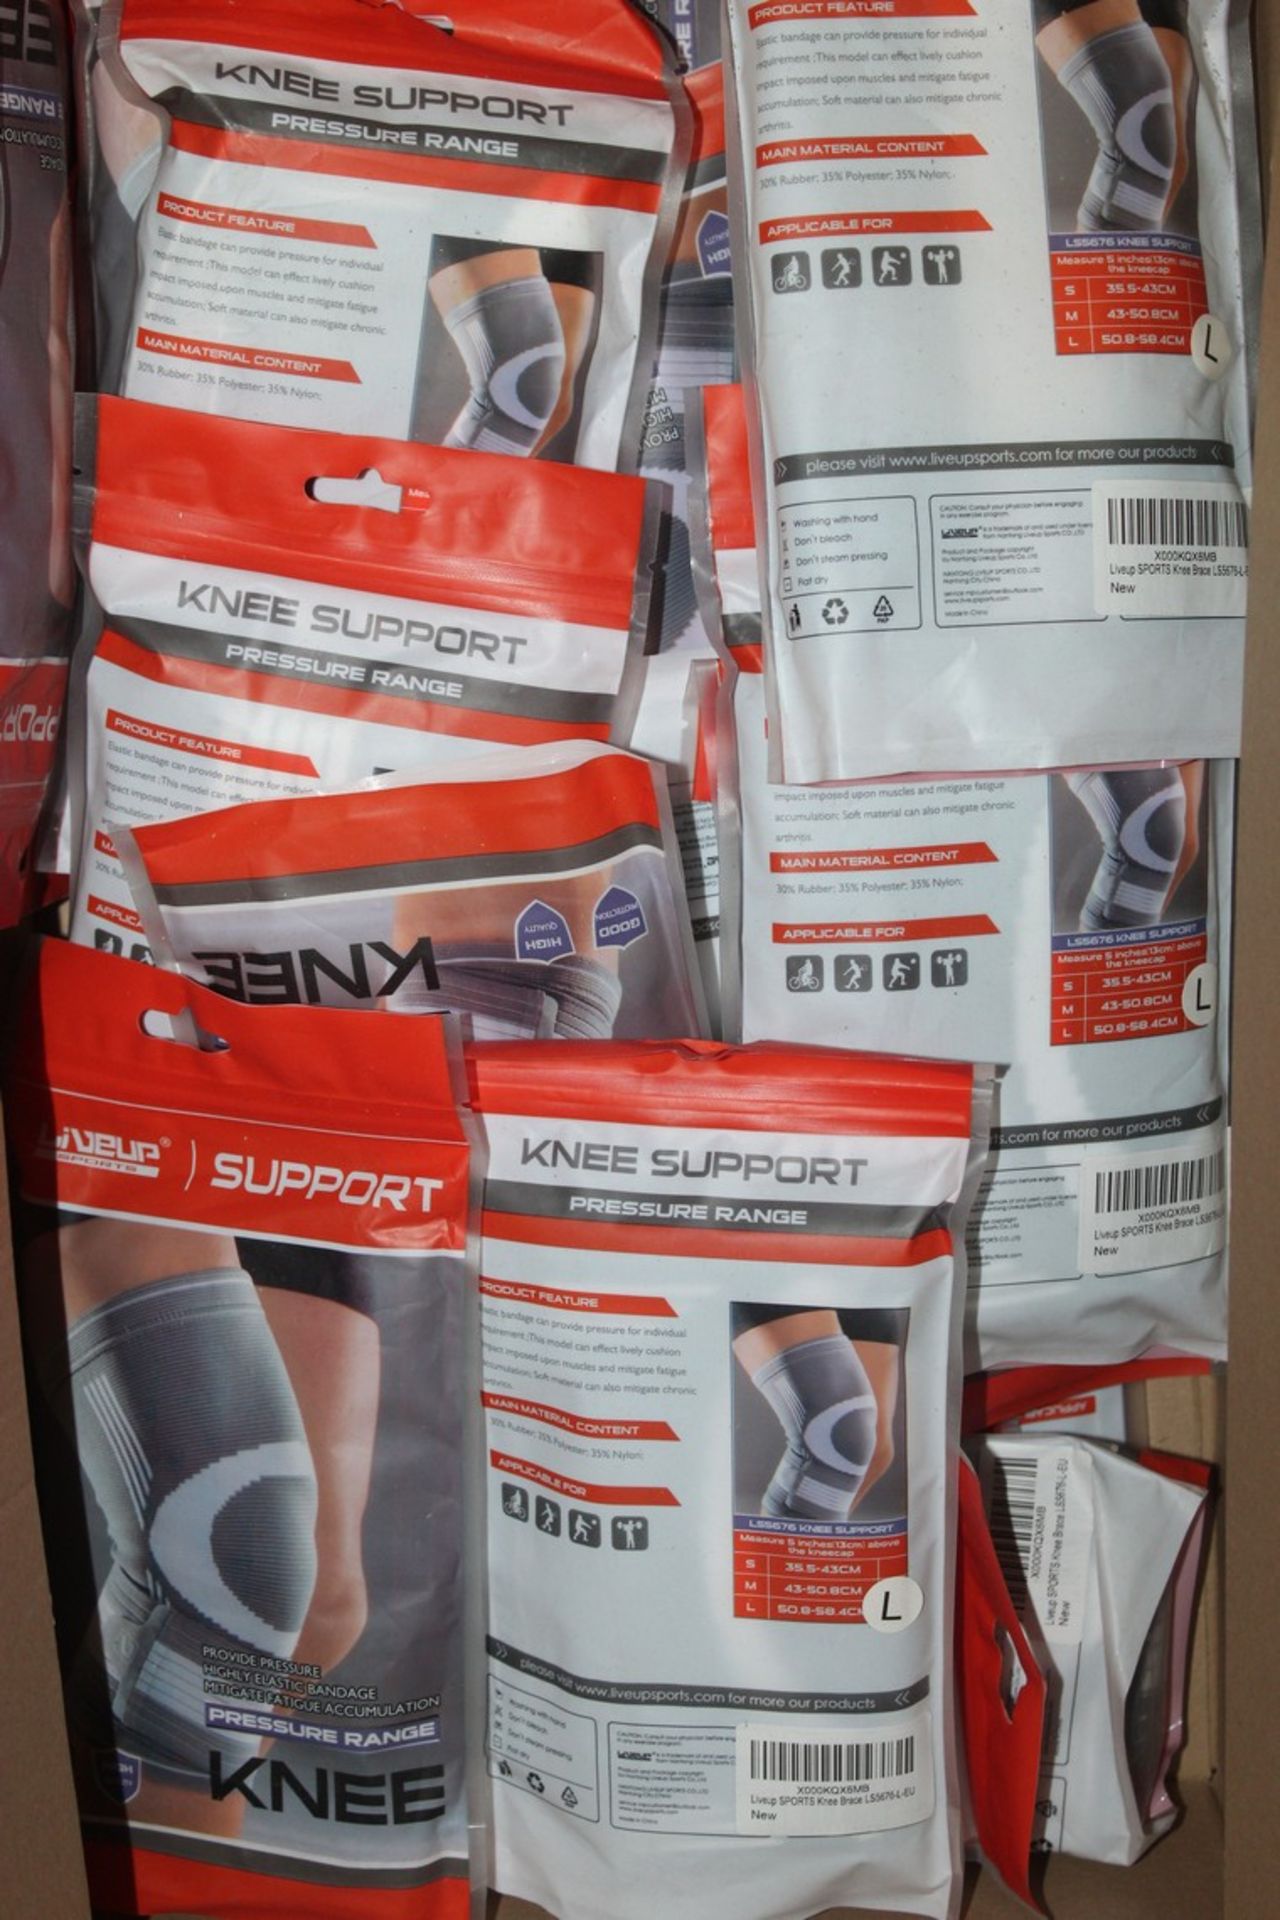 Assorted Brand New Live Support Pressure Range Knee Supports RRP £15 Each (Appraisals Available Upon